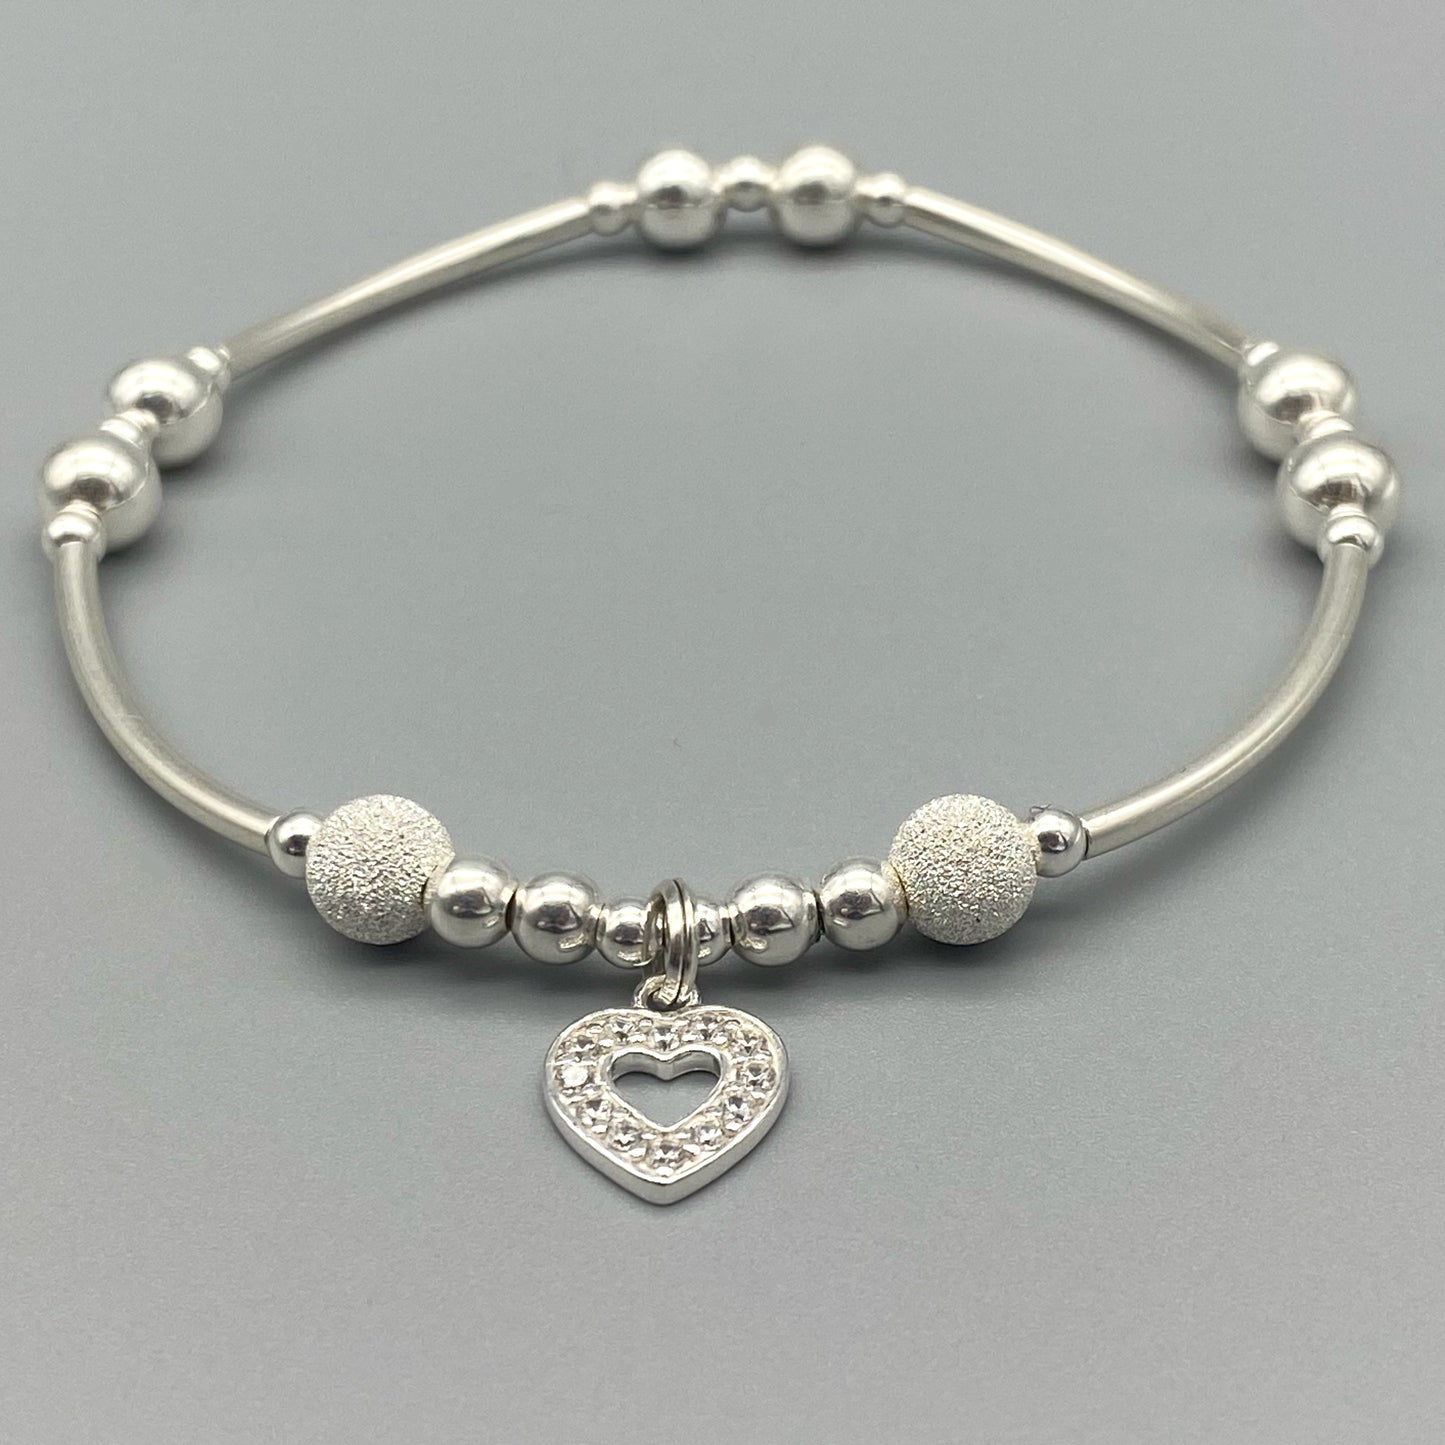 Diamond heart charm sterling silver hand-made women's stacking bracelet by My Silver Wish